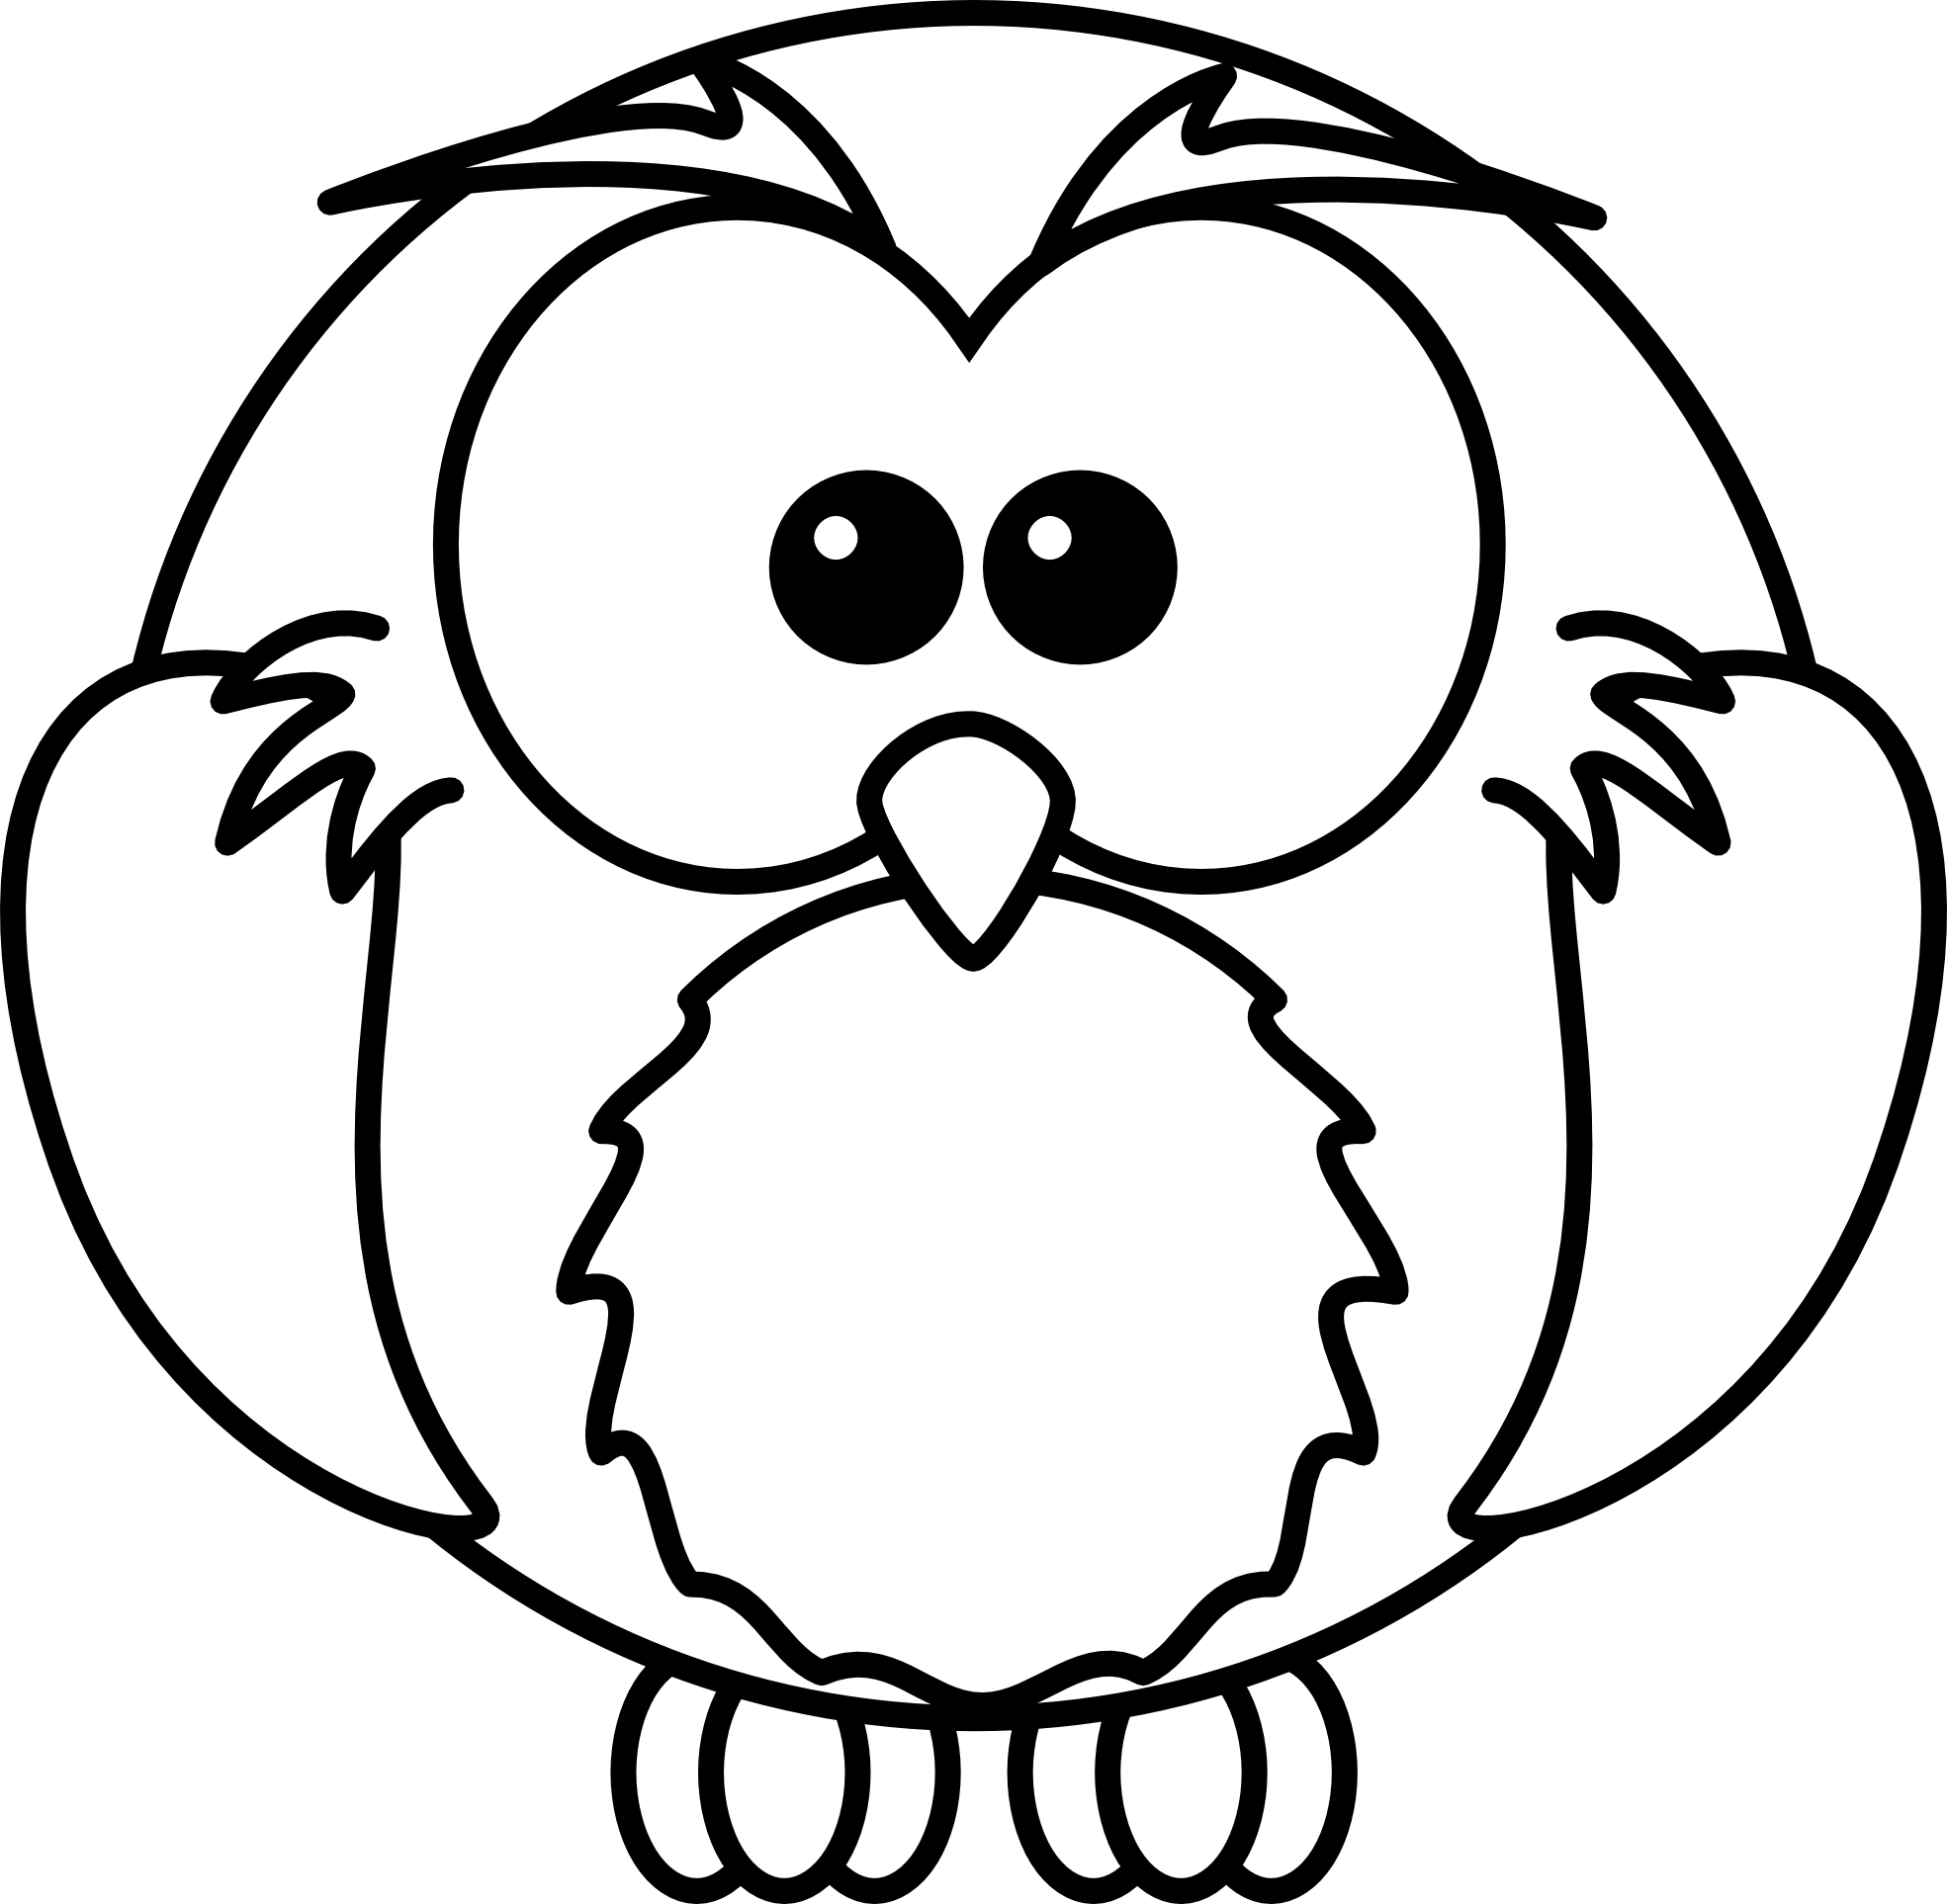 Baby Owl Clipart Black And White | Clipart Panda - Free Clipart Images